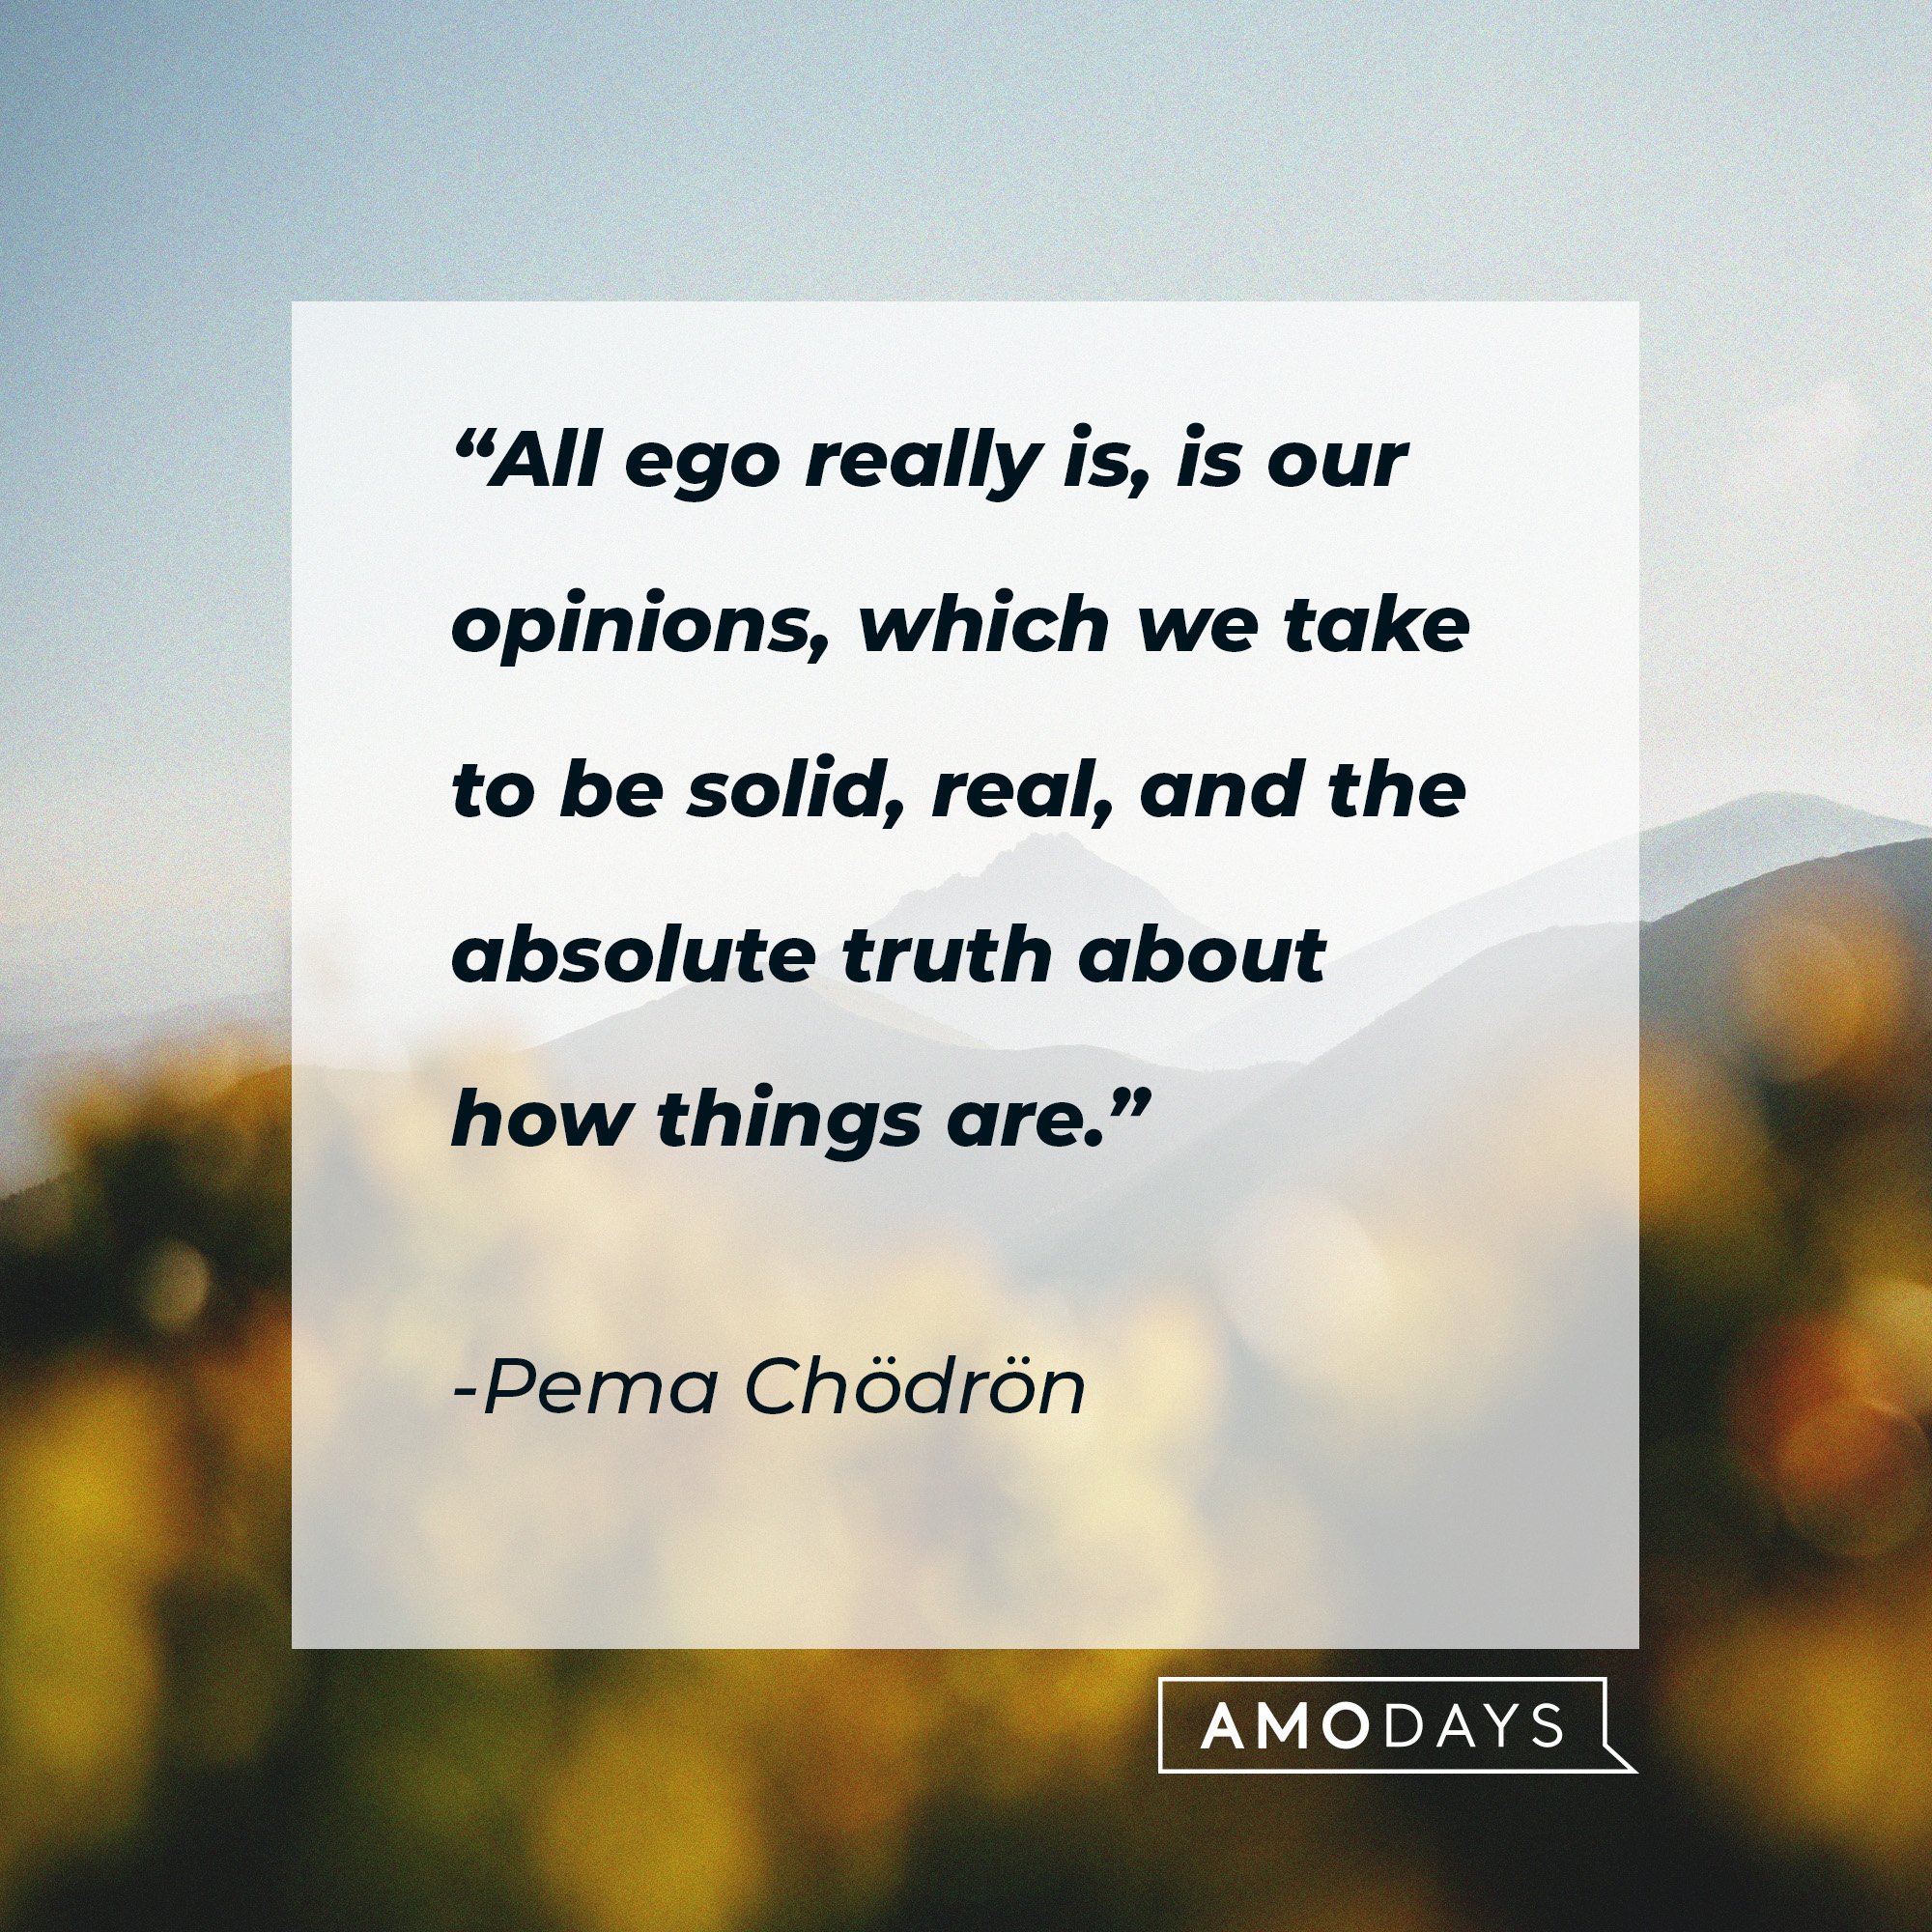  Pema Chödrön's quote: “All ego really is, is our opinions, which we take to be solid, real, and the absolute truth about how things are.” | Image: AmoDays